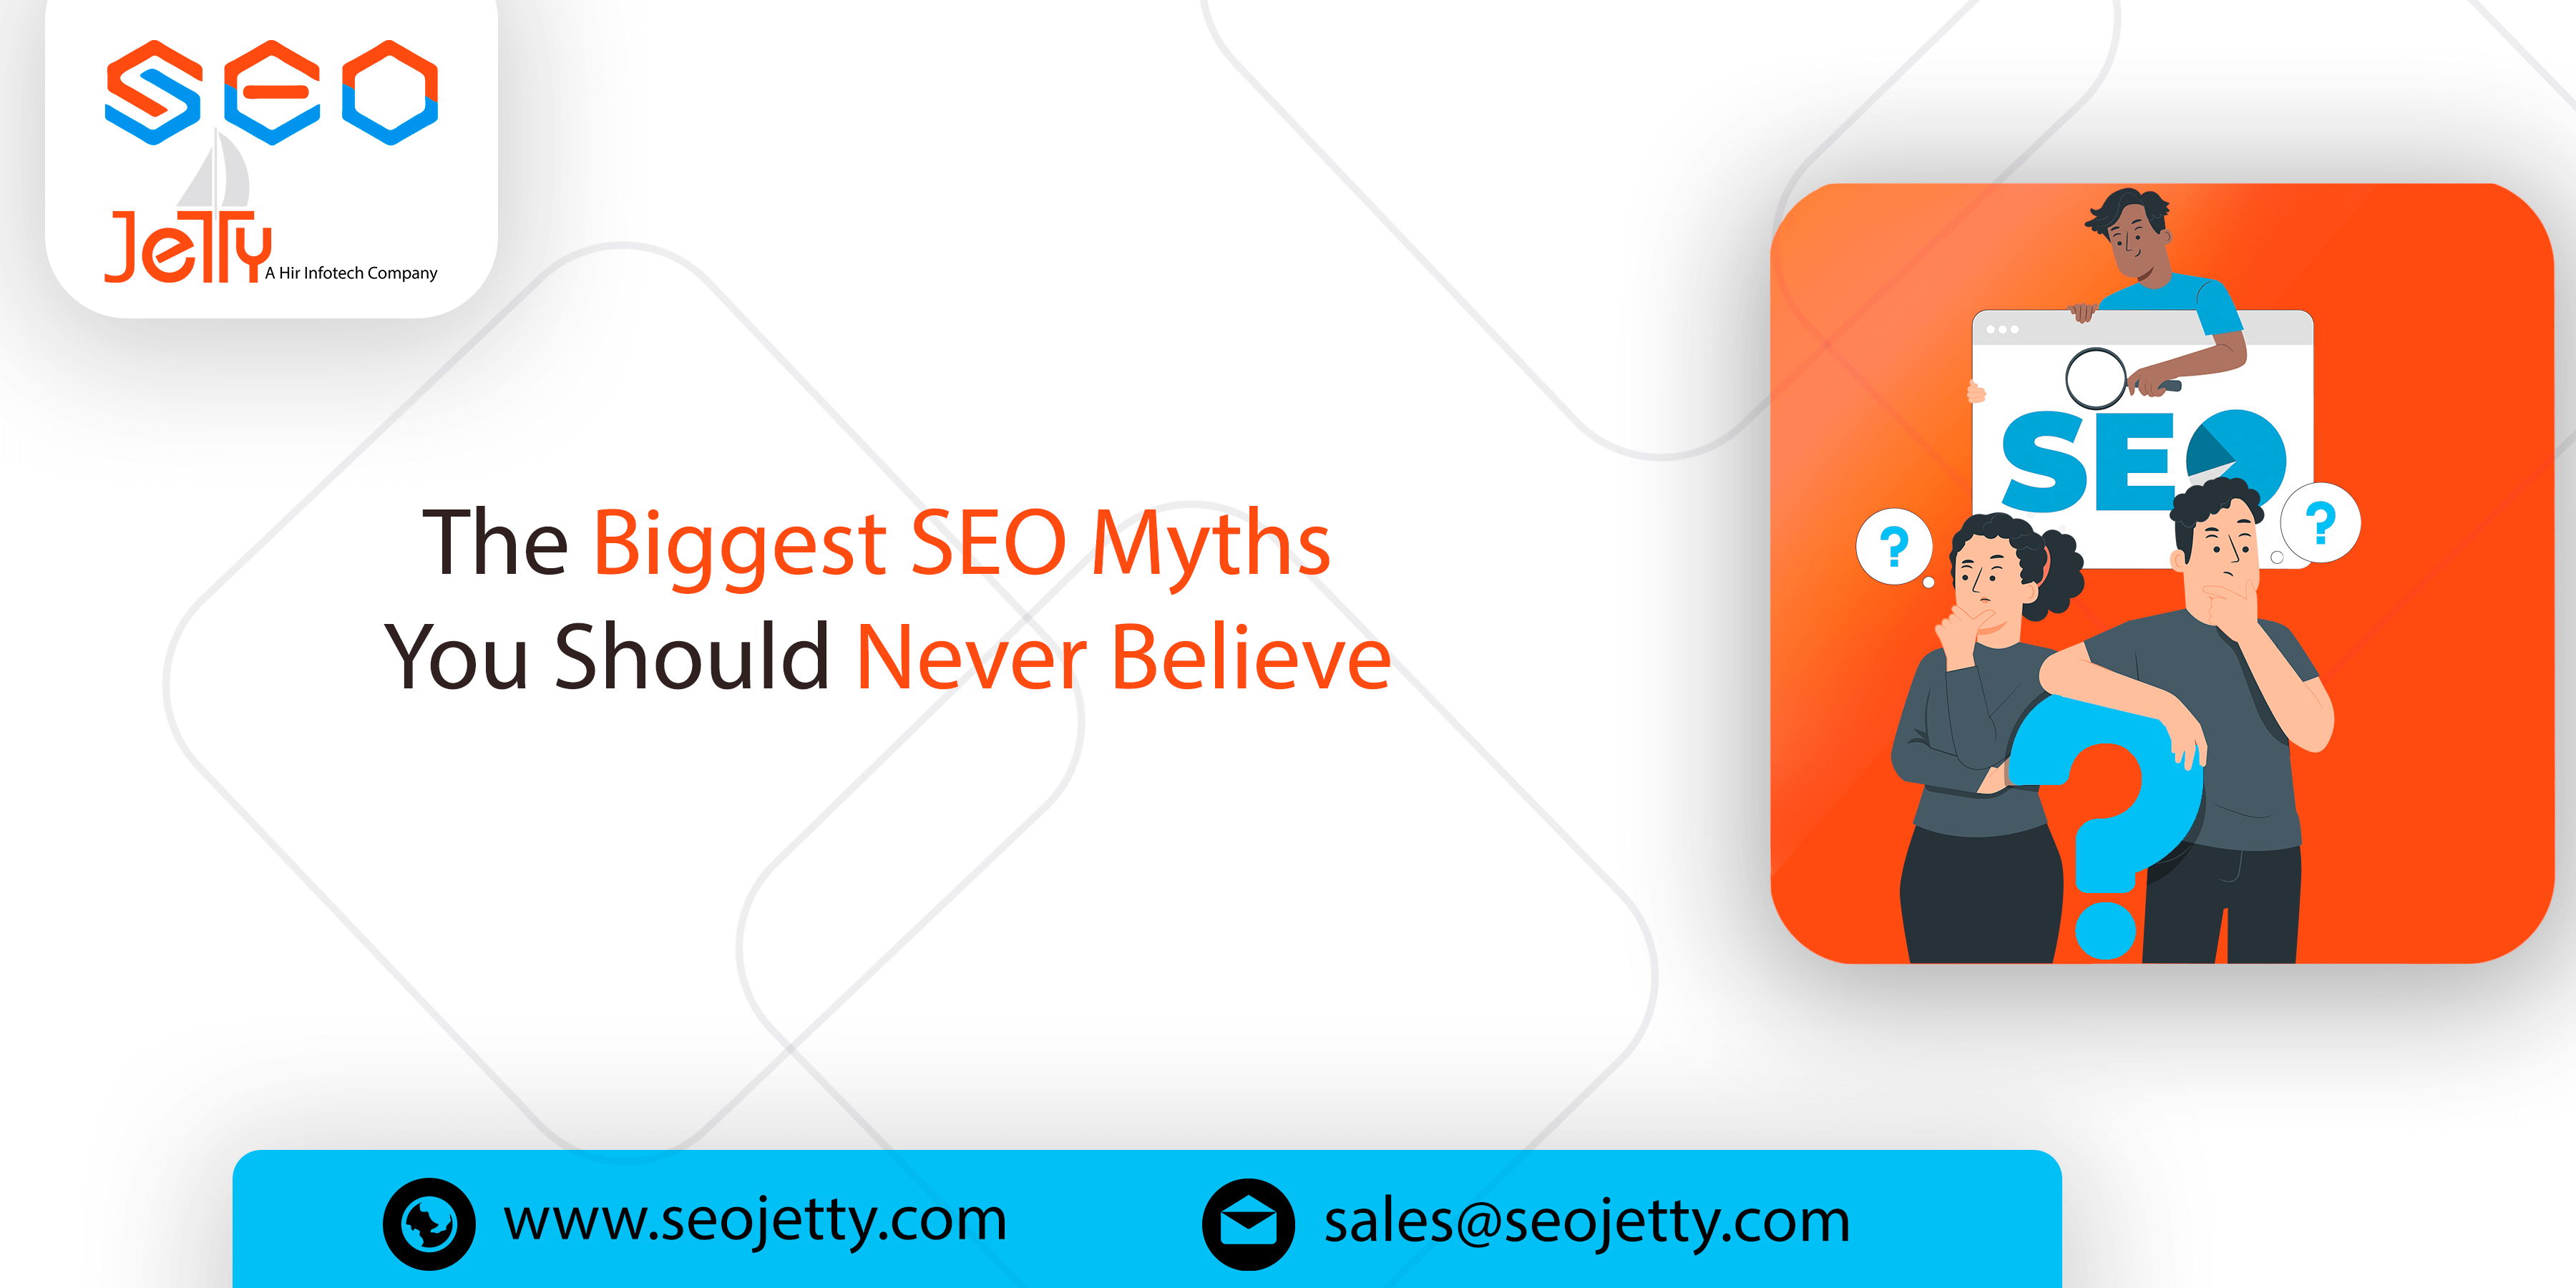 The Biggest SEO Myths You Should Never Believe